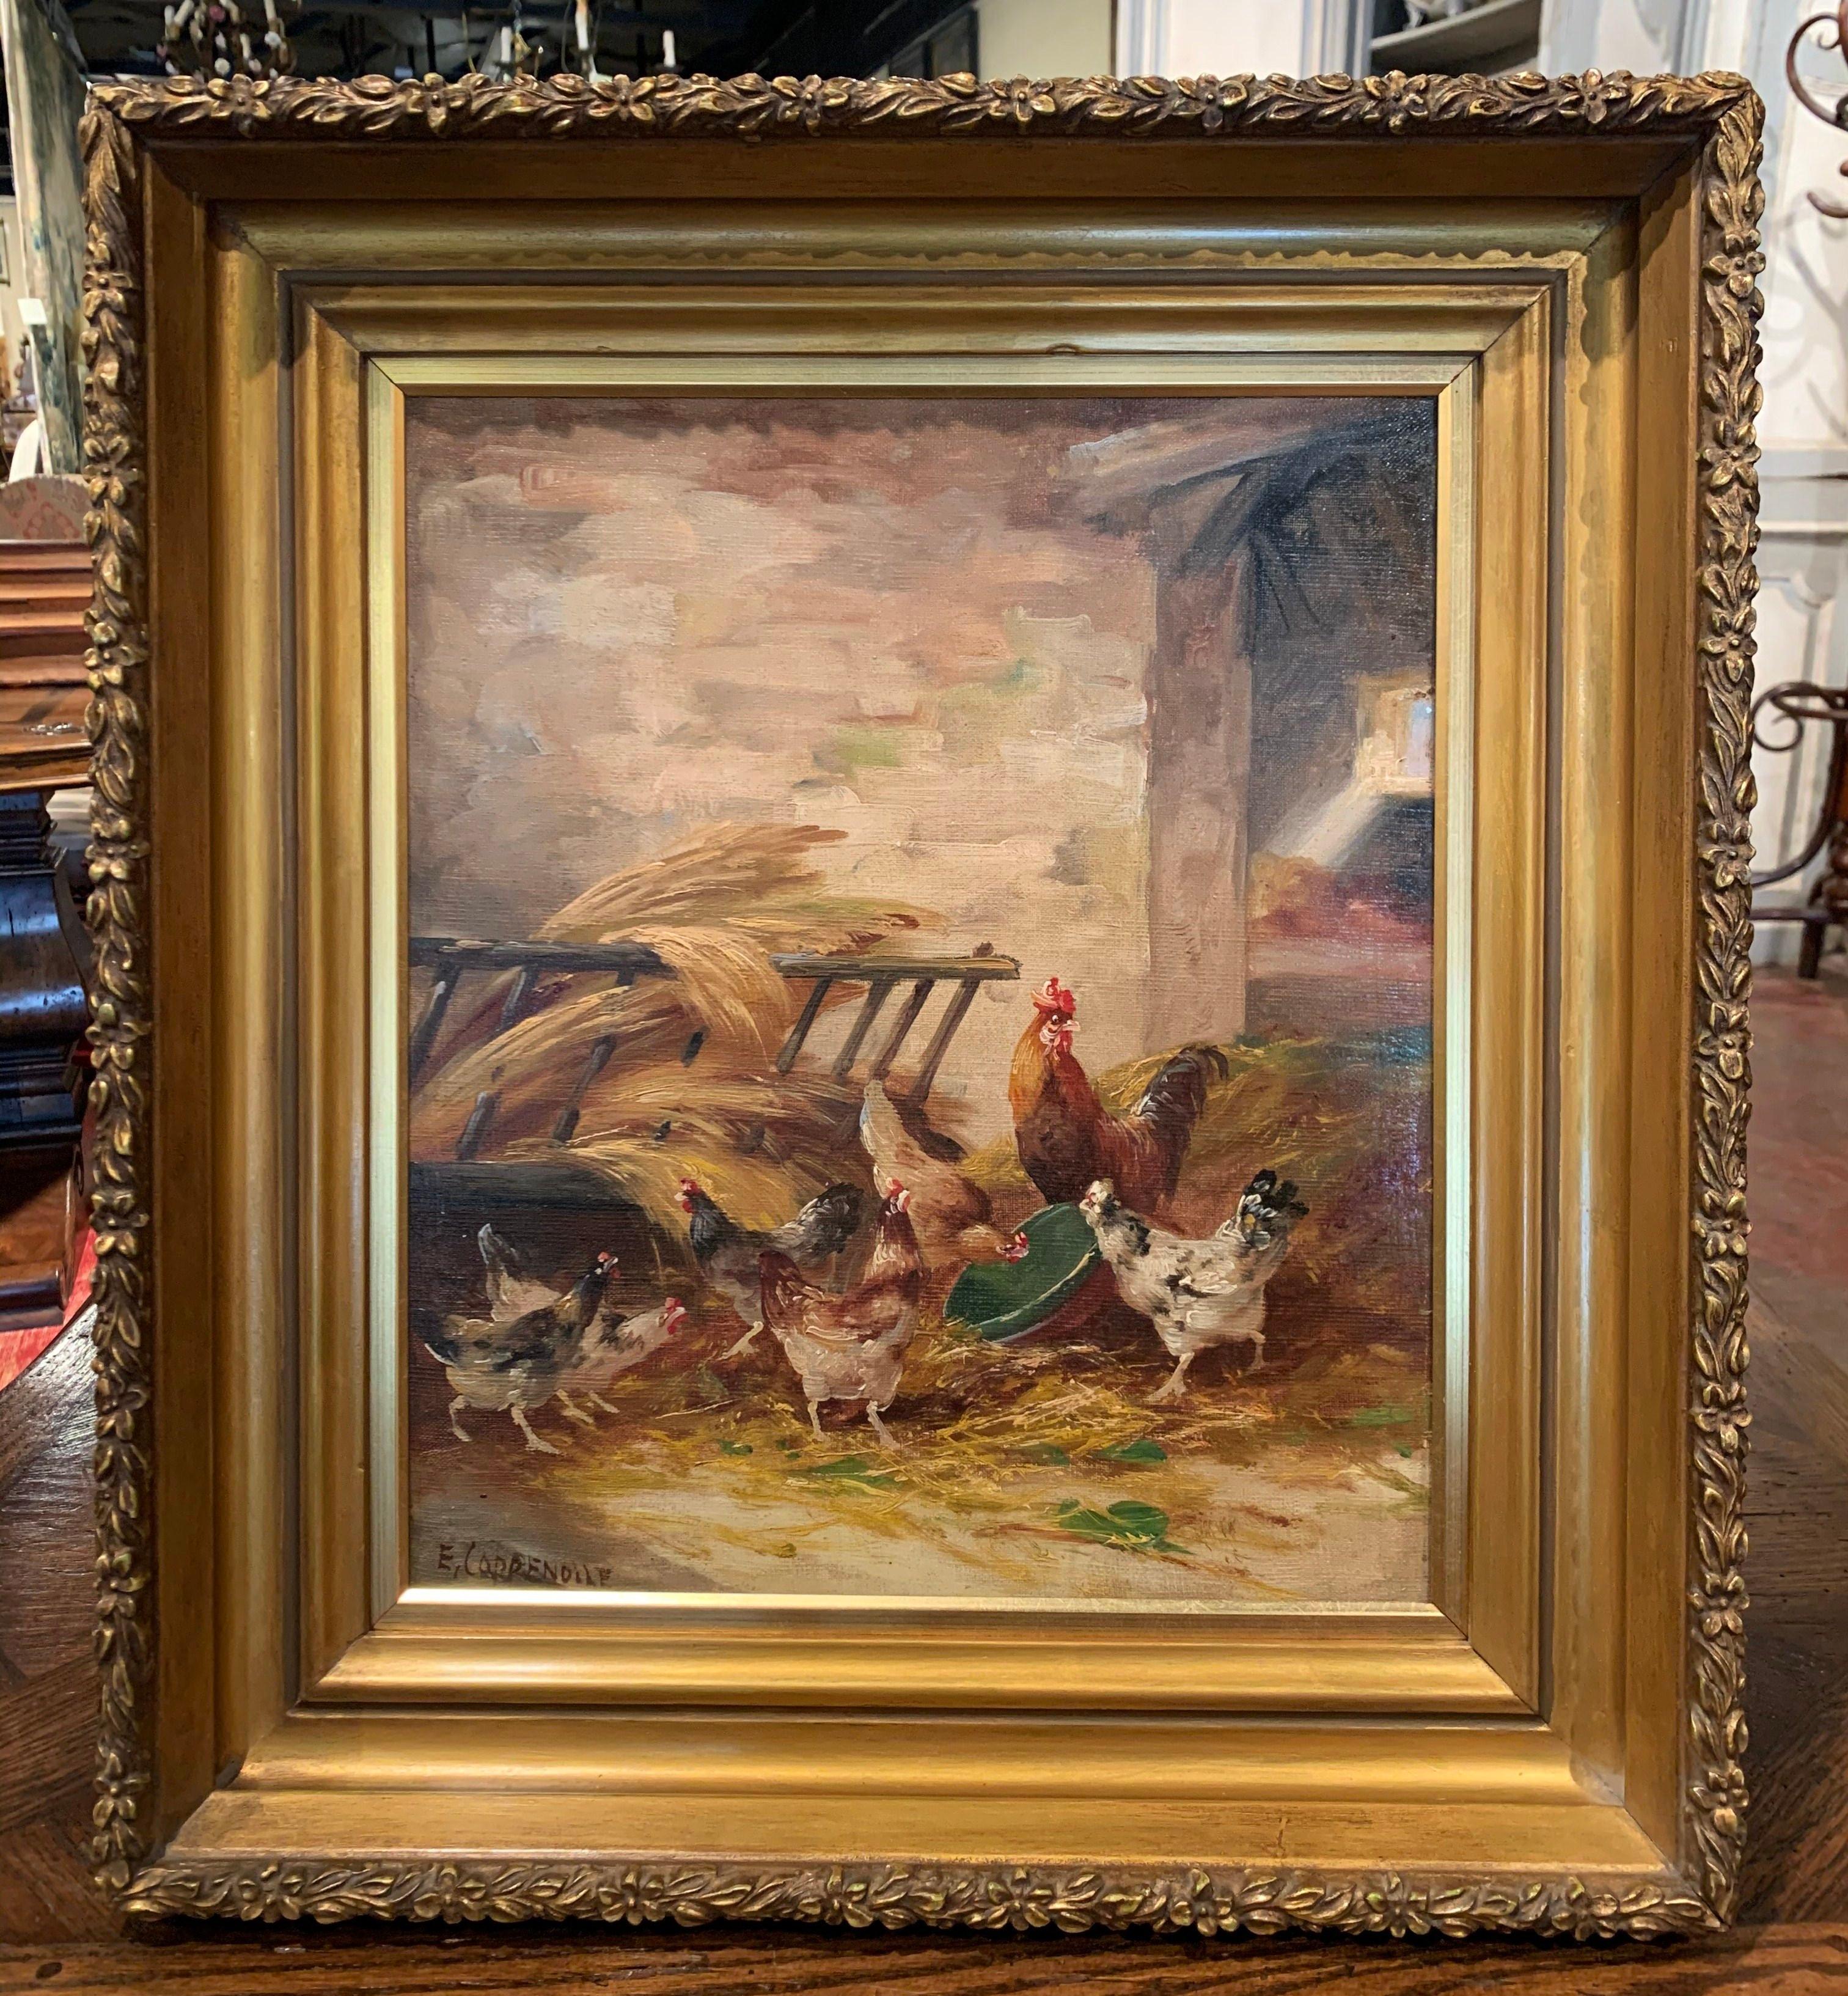 Carved 19th Century Oil on Canvas Chicken Painting in Gilt Frame Signed E. Coppenolle